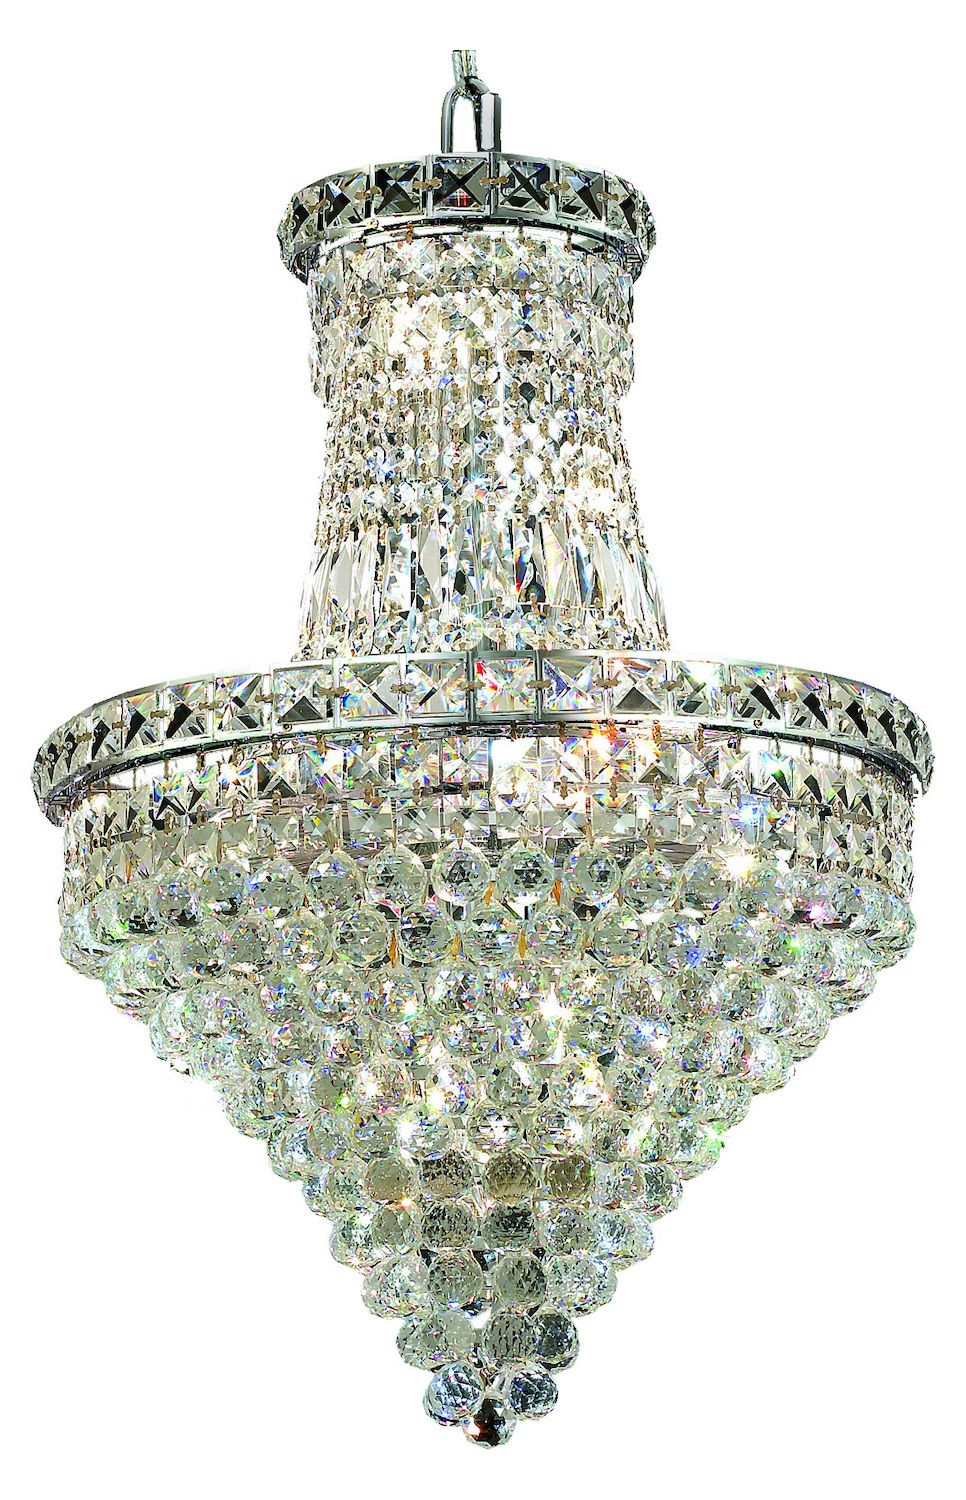 Elegant Lighting Royal Cut Clear Crystal Tranquil 12 Light Within Royal Cut Crystal Chandeliers (View 1 of 15)